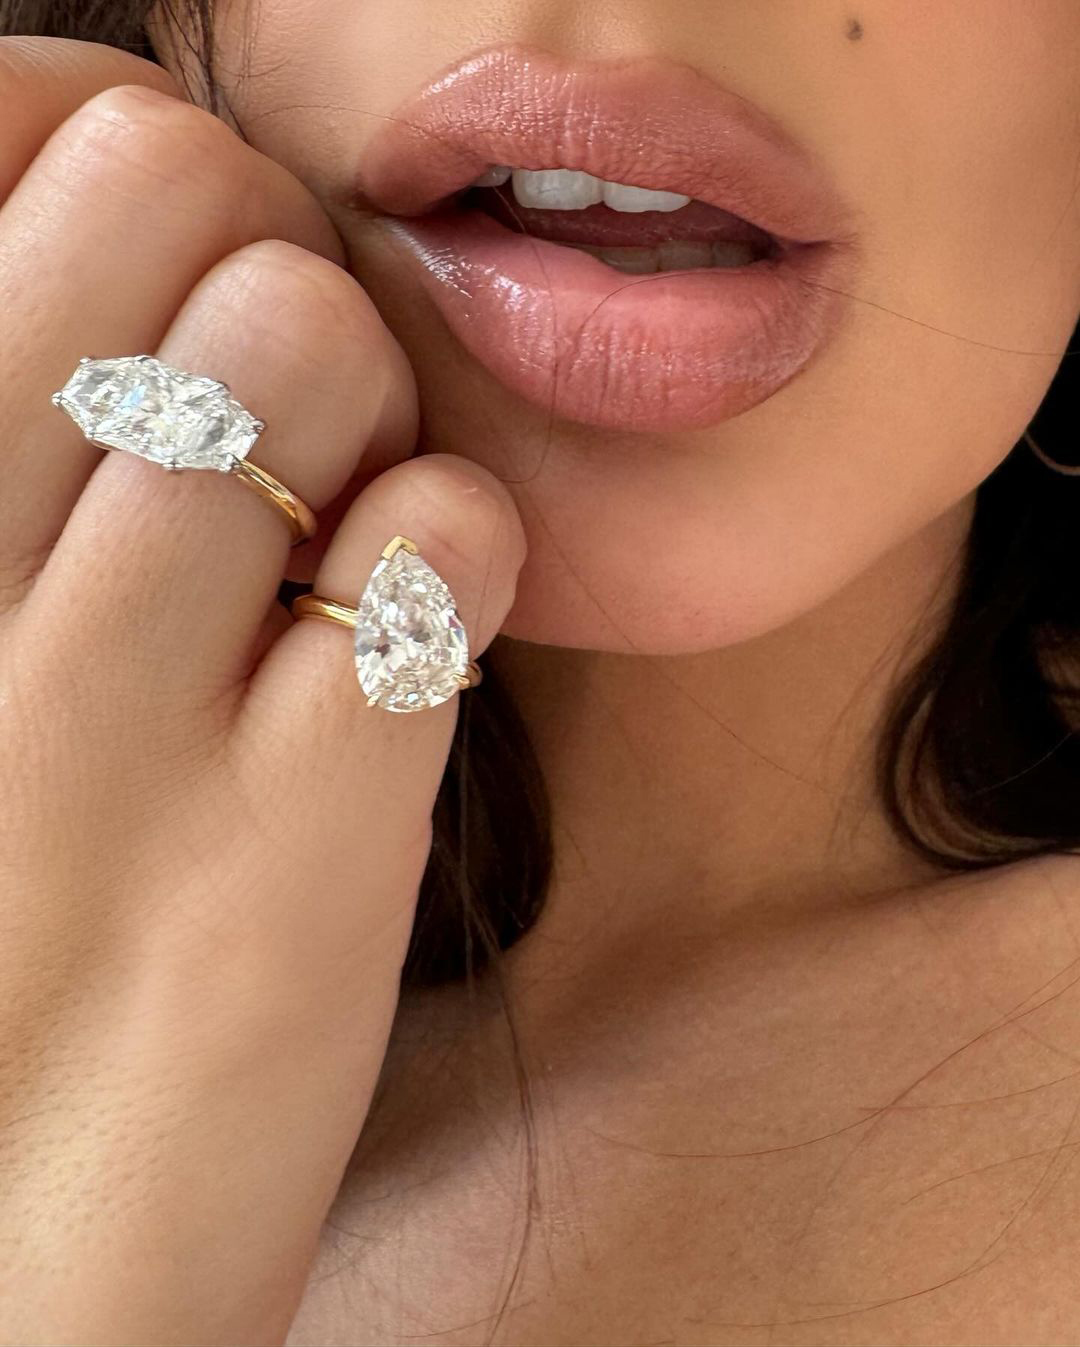 EmRata's Once-Viral Engagement Ring Is Now a Divorce Ring